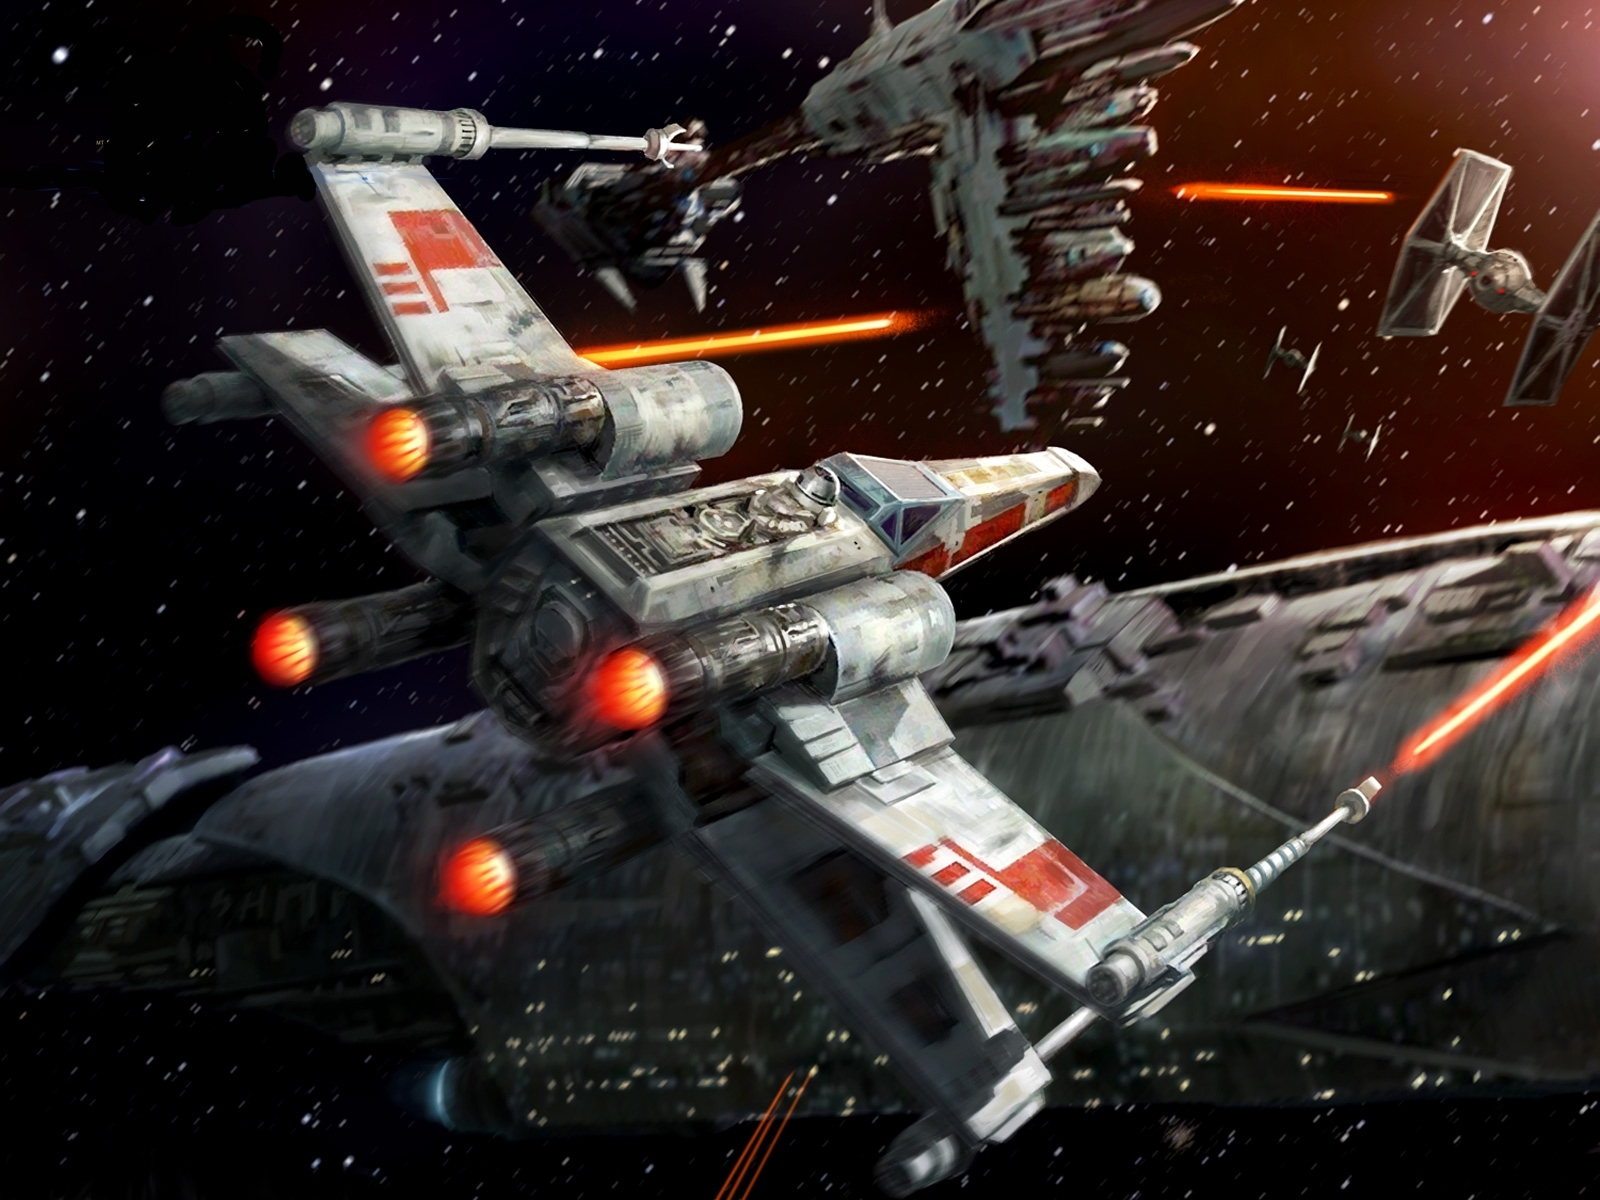 Download hd wallpapers of 28337fantasy Art Star Wars Xwing Free  download High Quality and Widesc  Star wars spaceships Star wars images  Star wars wallpaper